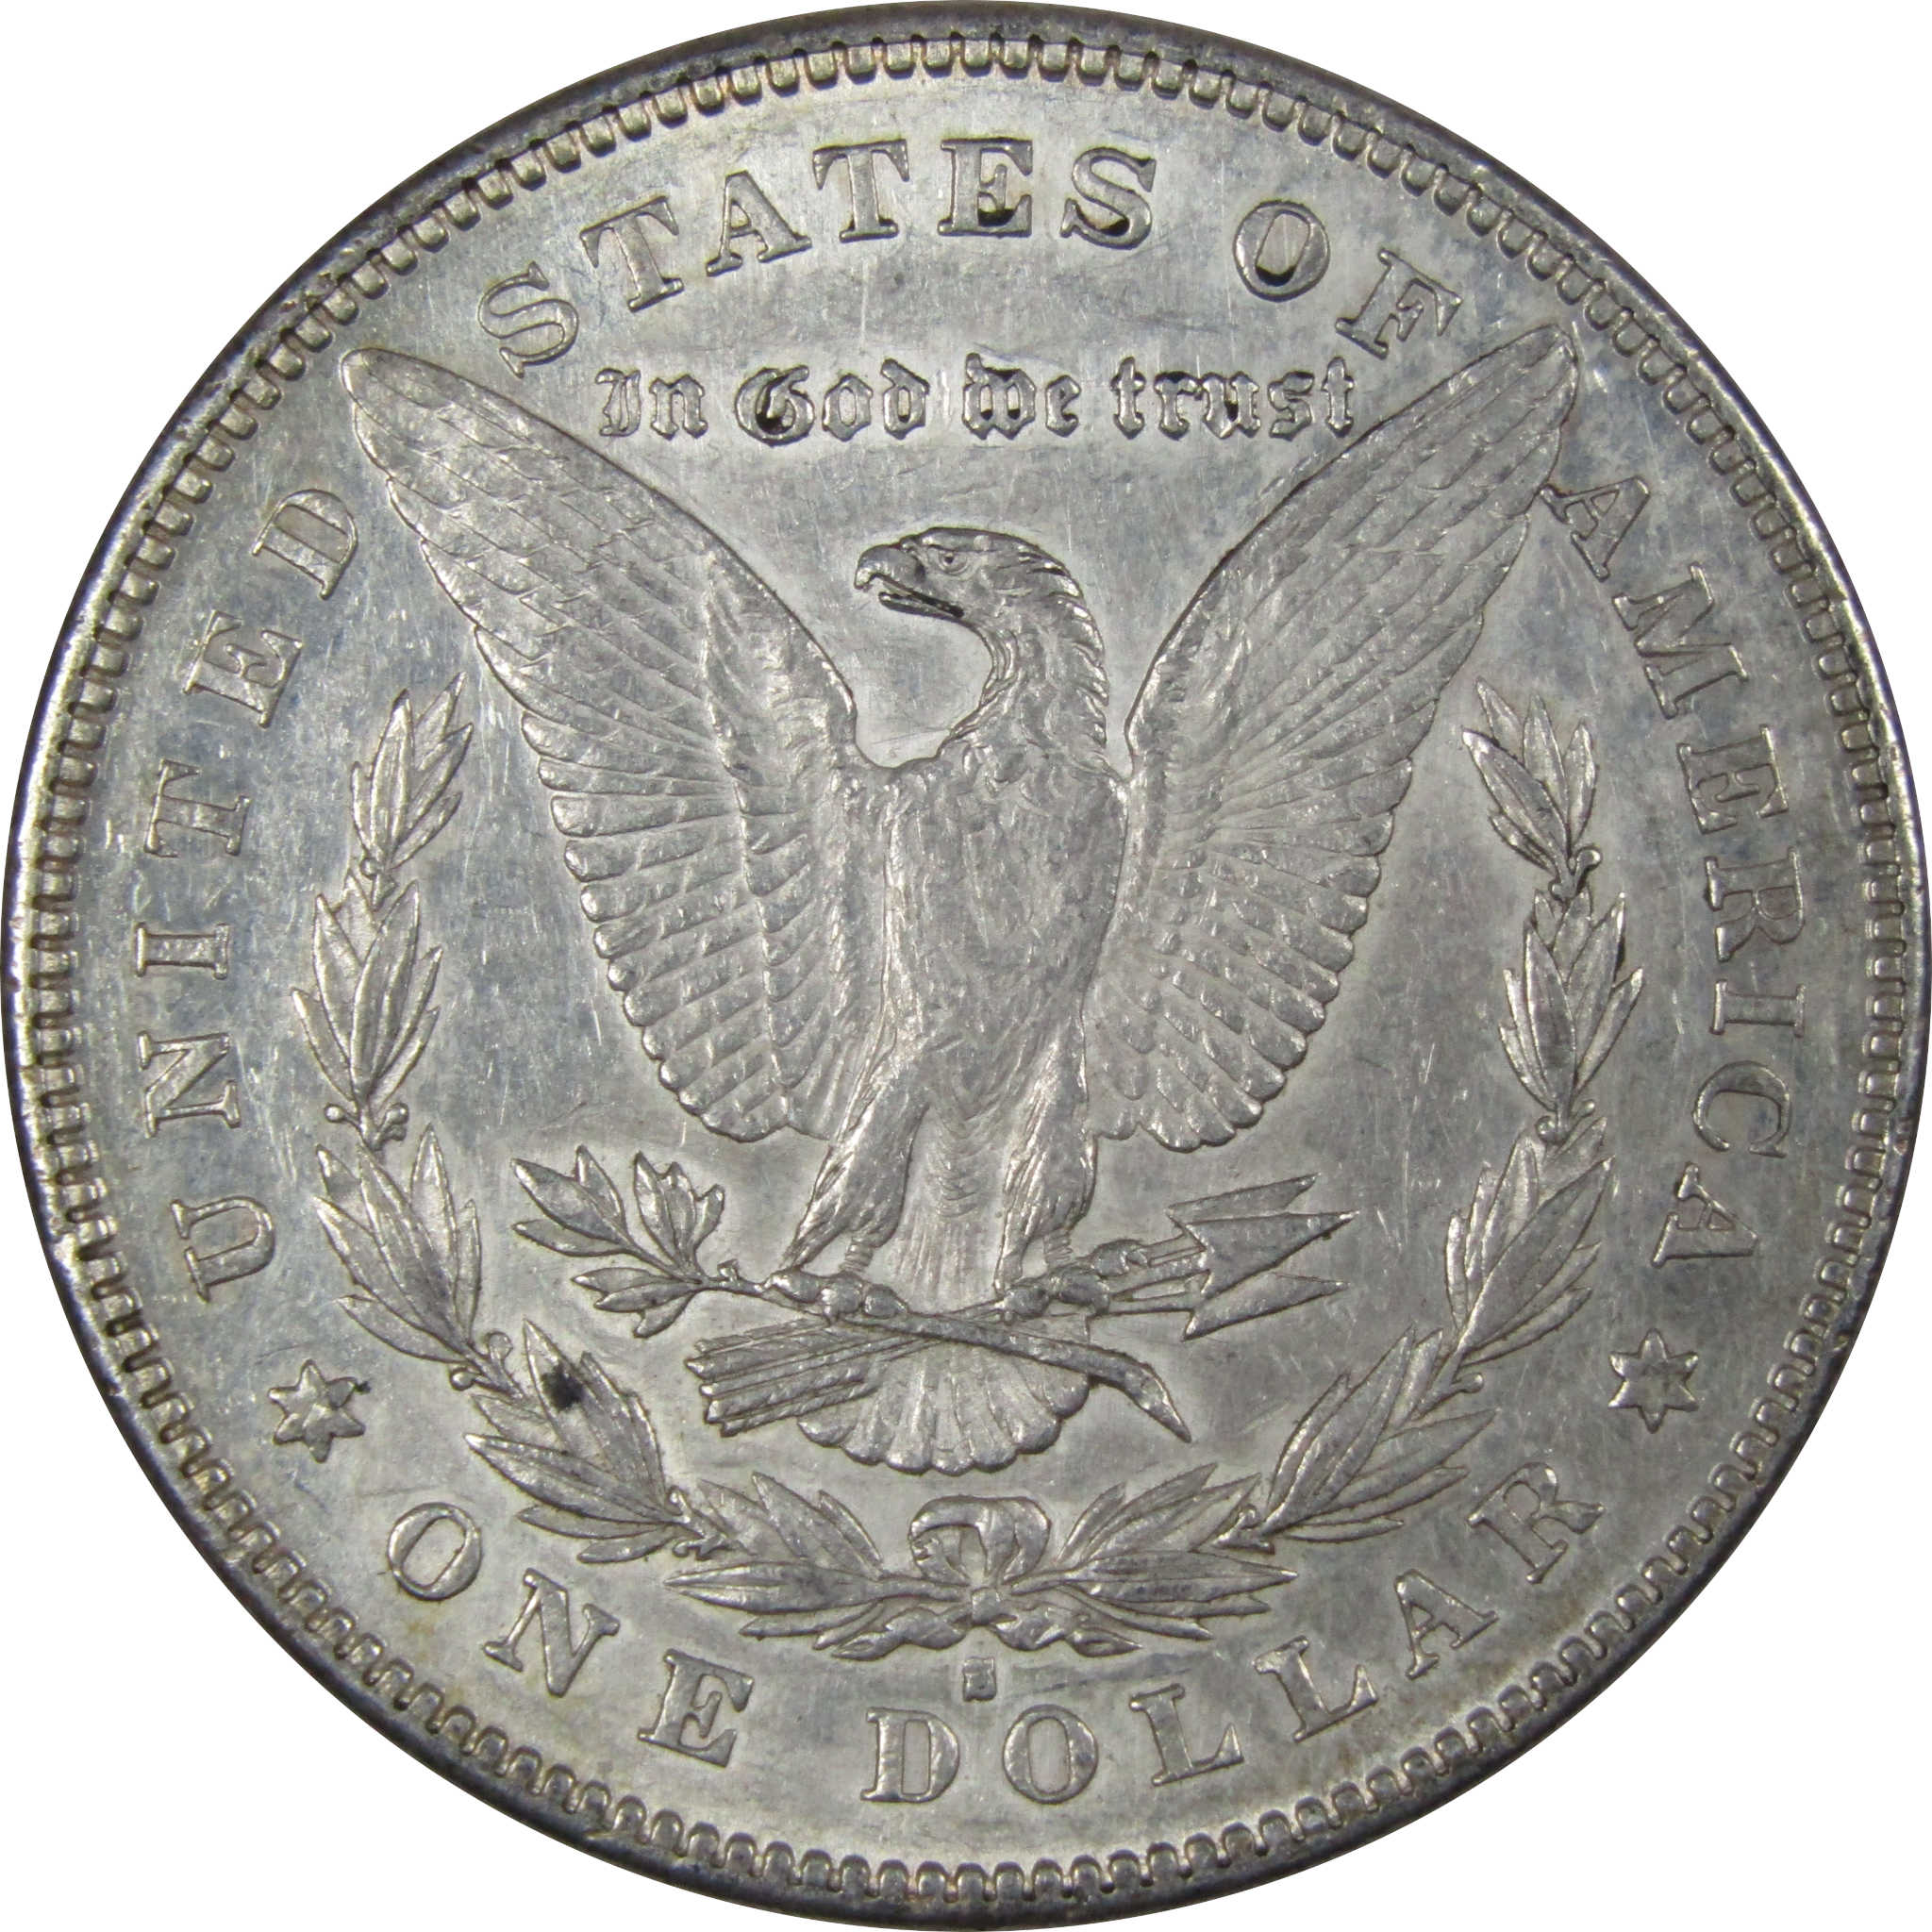 1878 S Morgan Dollar XF EF Extremely Fine 90% Silver SKU:IPC8270 - Morgan coin - Morgan silver dollar - Morgan silver dollar for sale - Profile Coins &amp; Collectibles